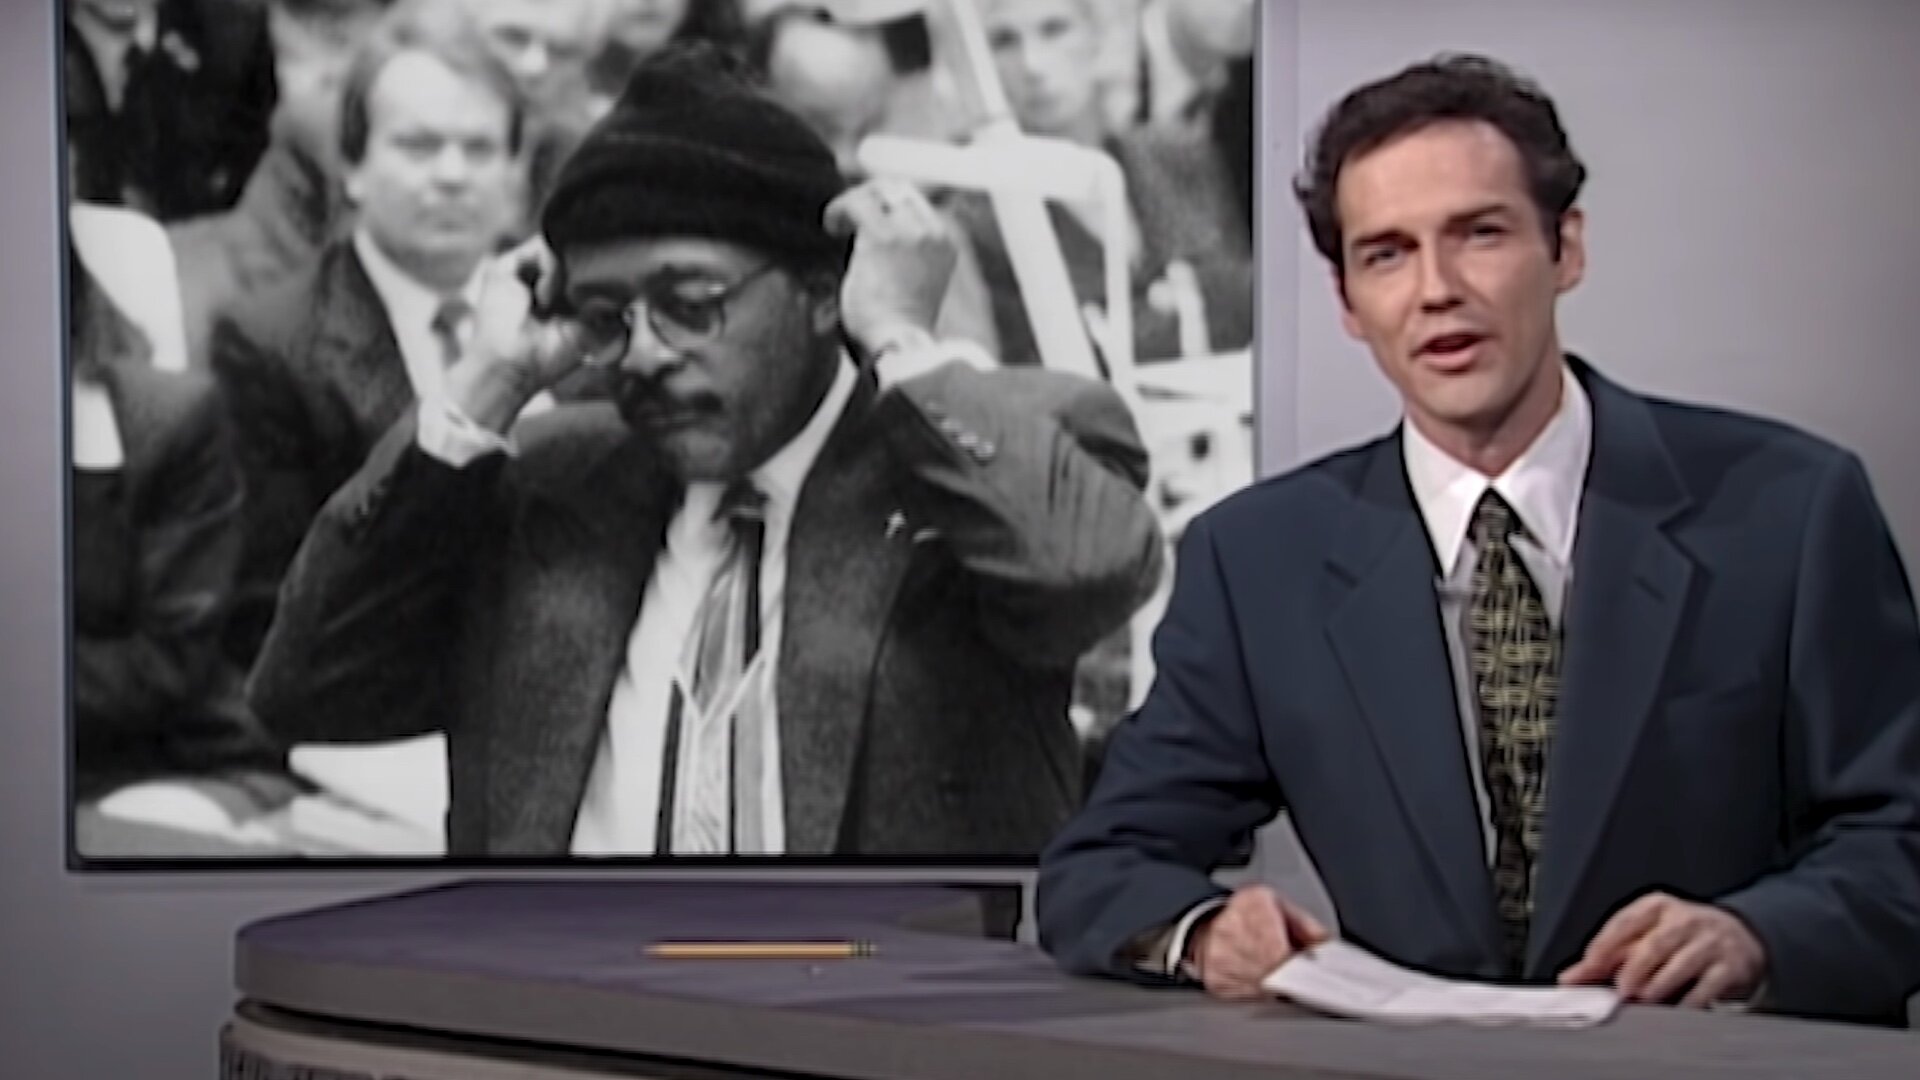 SNL Pays Tribute to Norm Macdonald During Weekend Update Segment